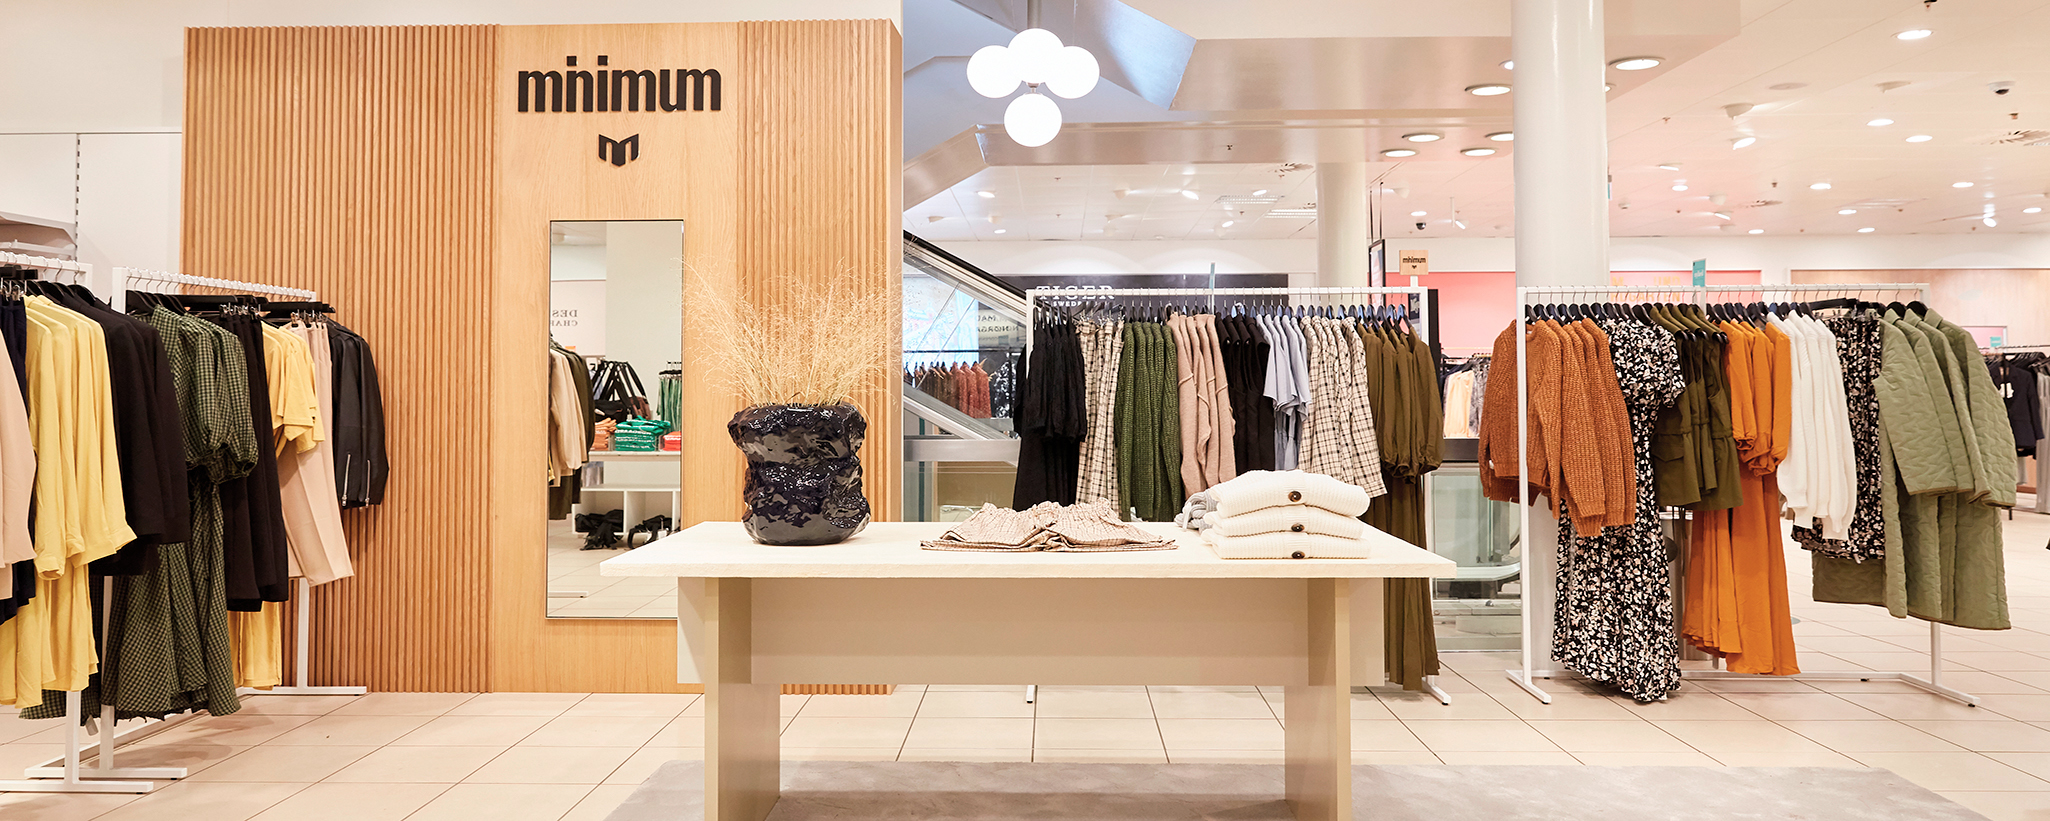 minimum: shop-in-shop display for clothing